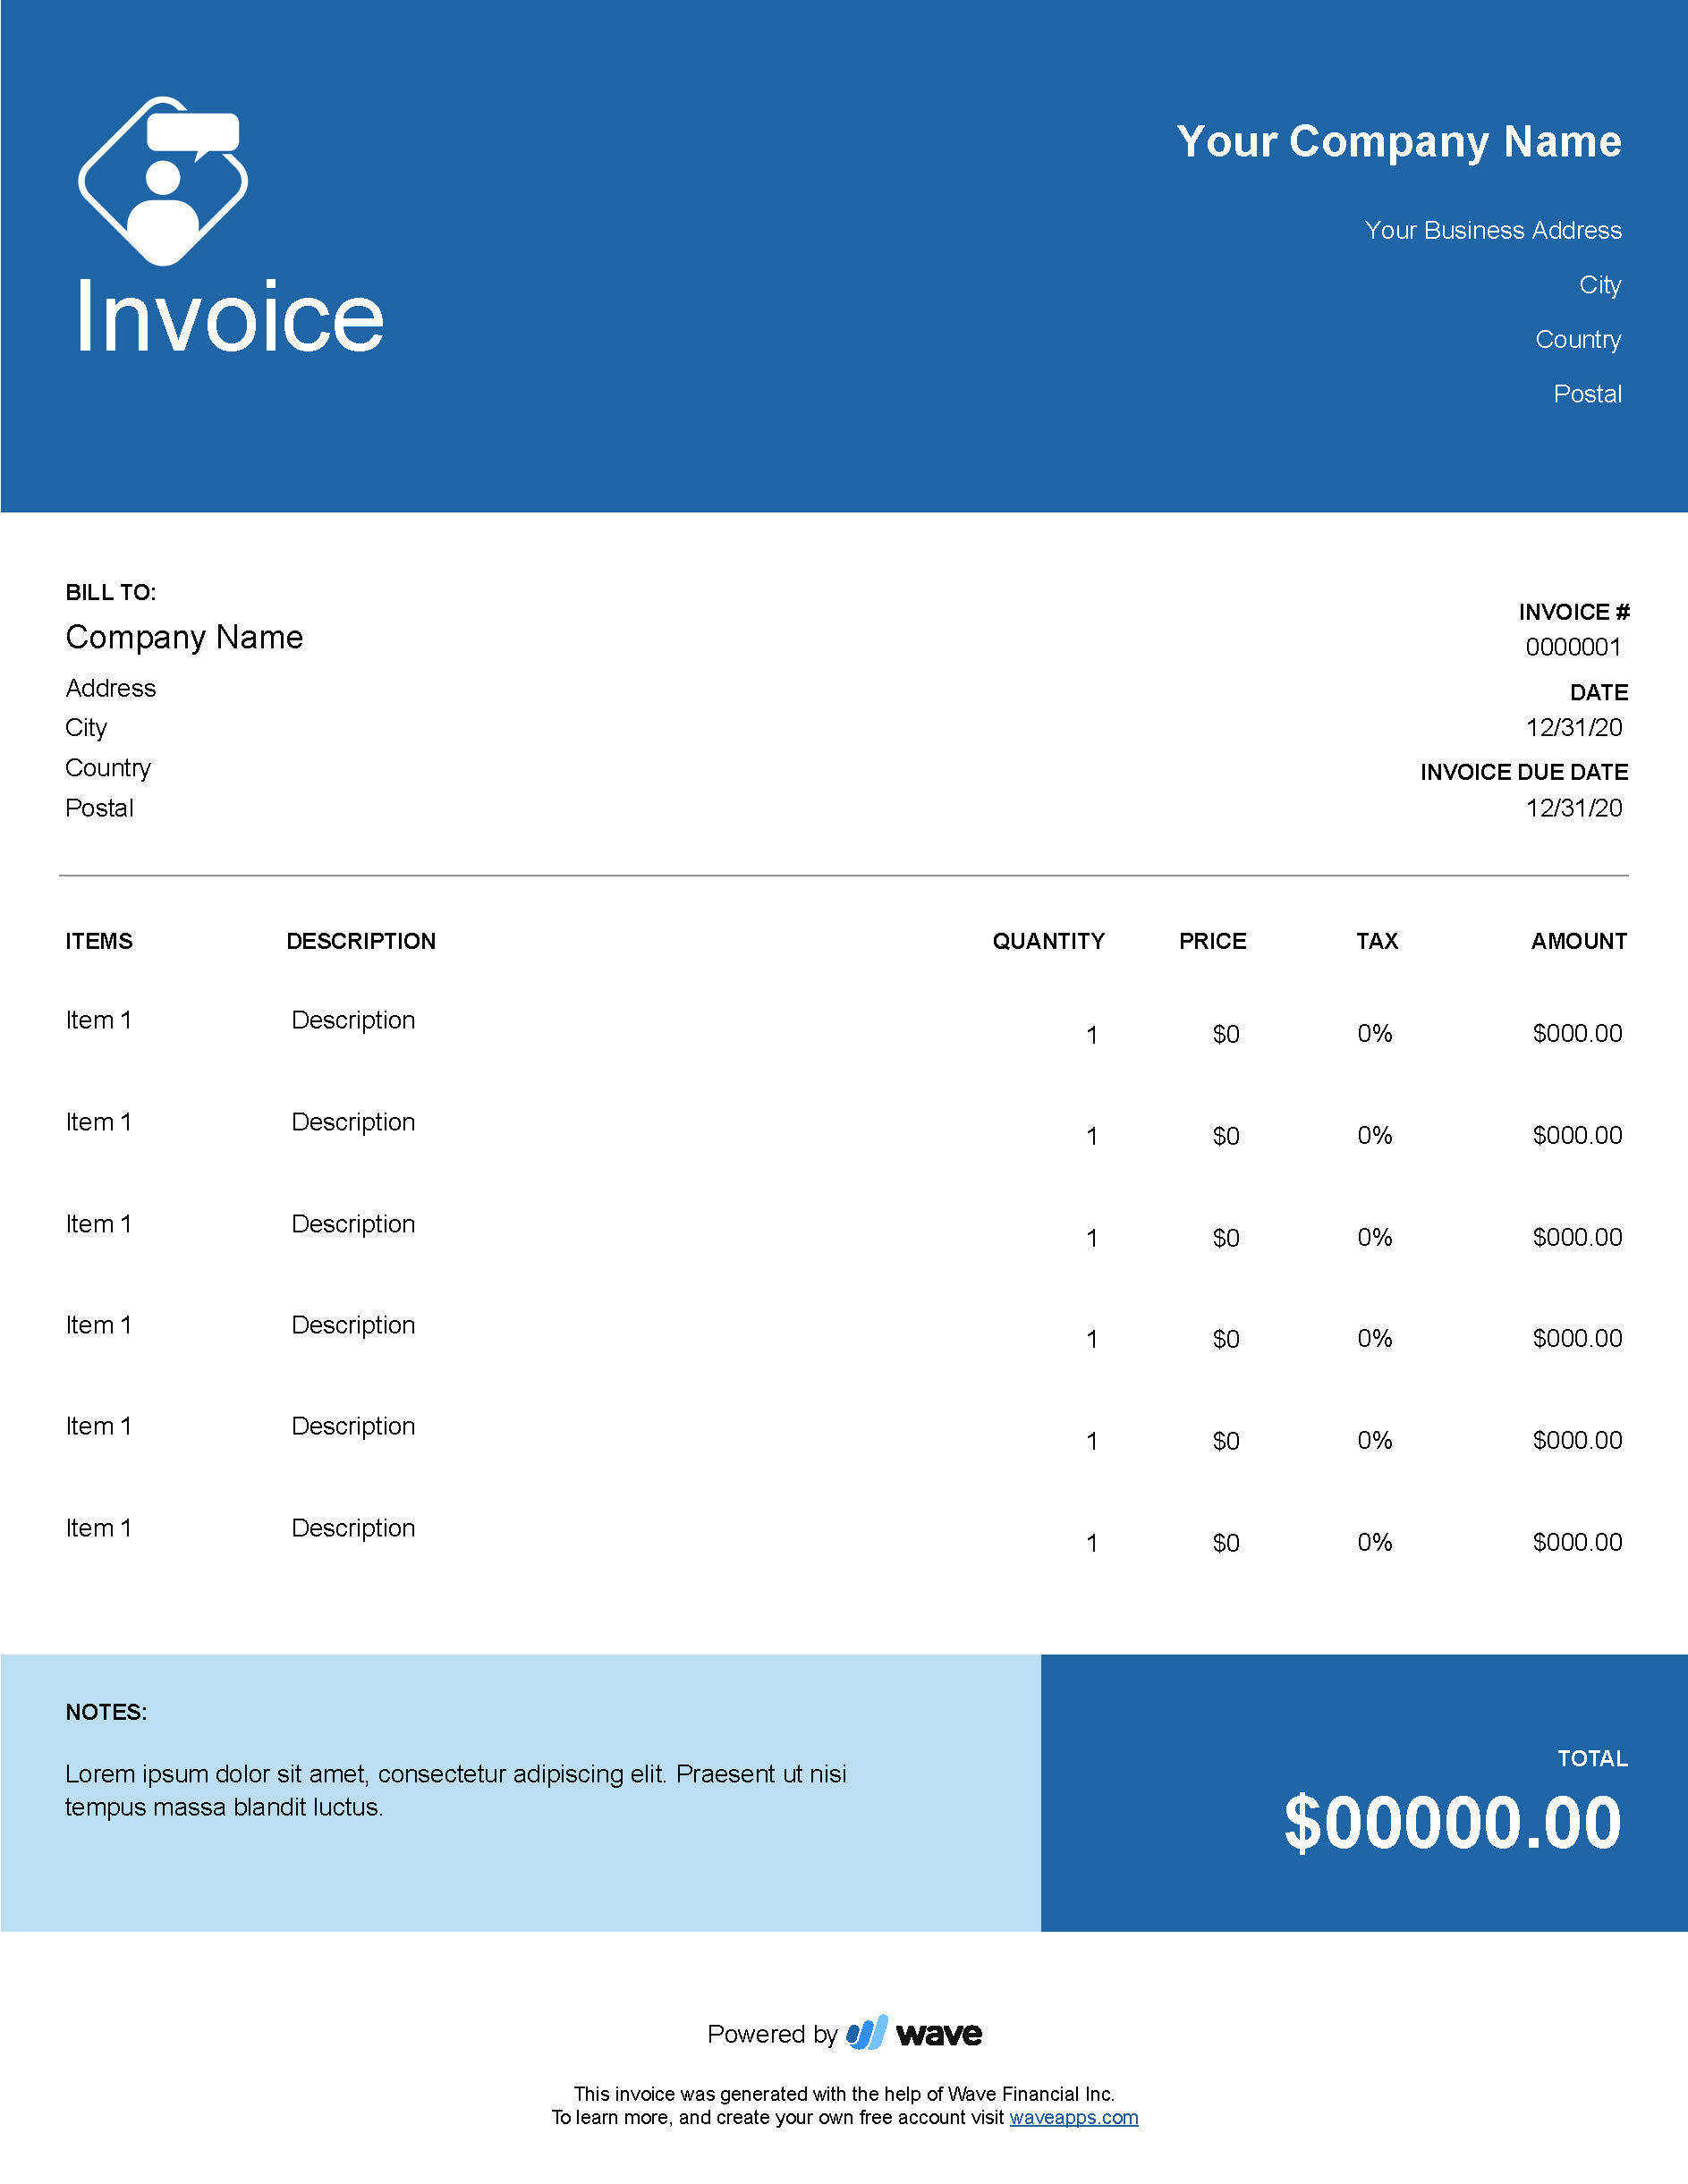 Consulting Invoice Template – Wave Financial For Image Of Invoice Template